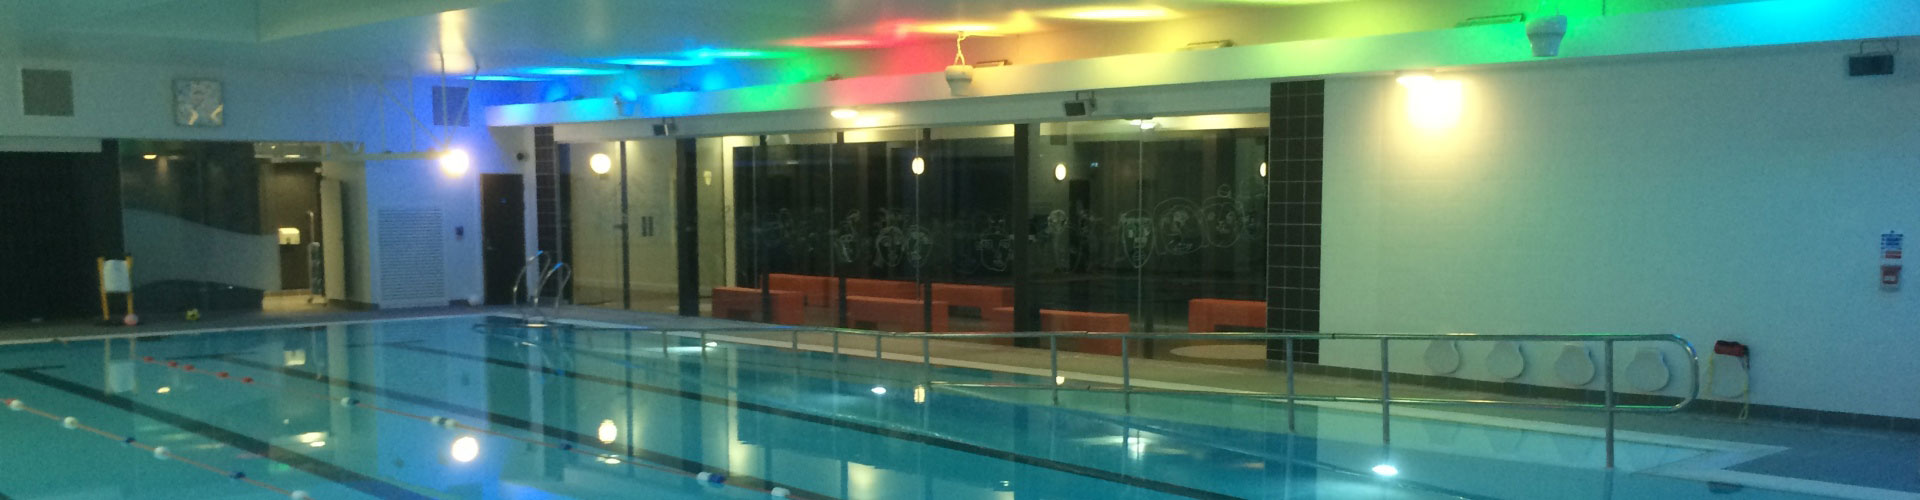 Airius Cooling Fans Maintaining Comfort in a Swimming Pool